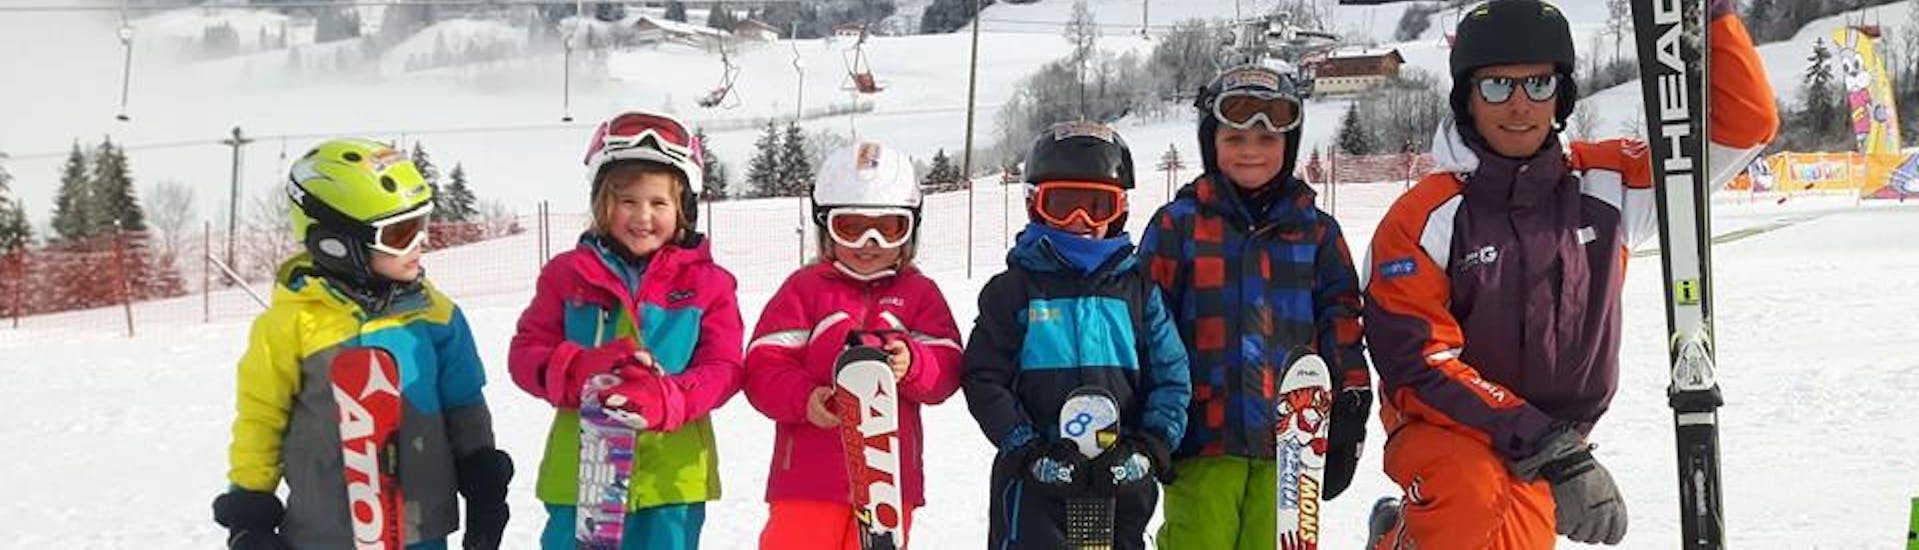 Kids Ski Lessons (4-6 y.) + Ski Hire Package for All Levels from Skischule Toni Gruber.